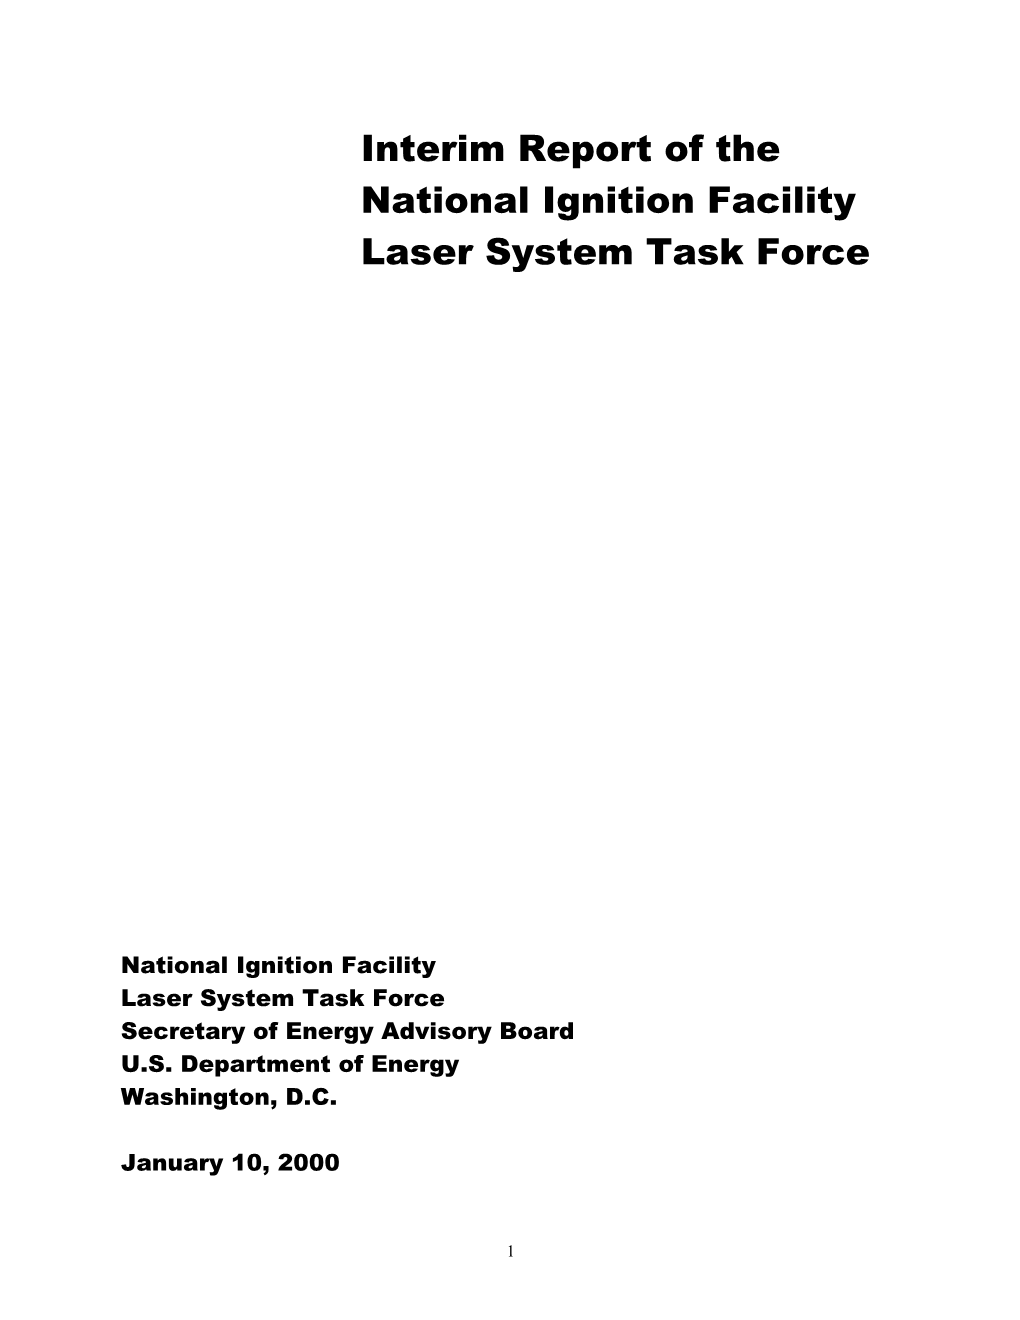 Interim Report of the National Ignition Facility Laser System Task Force